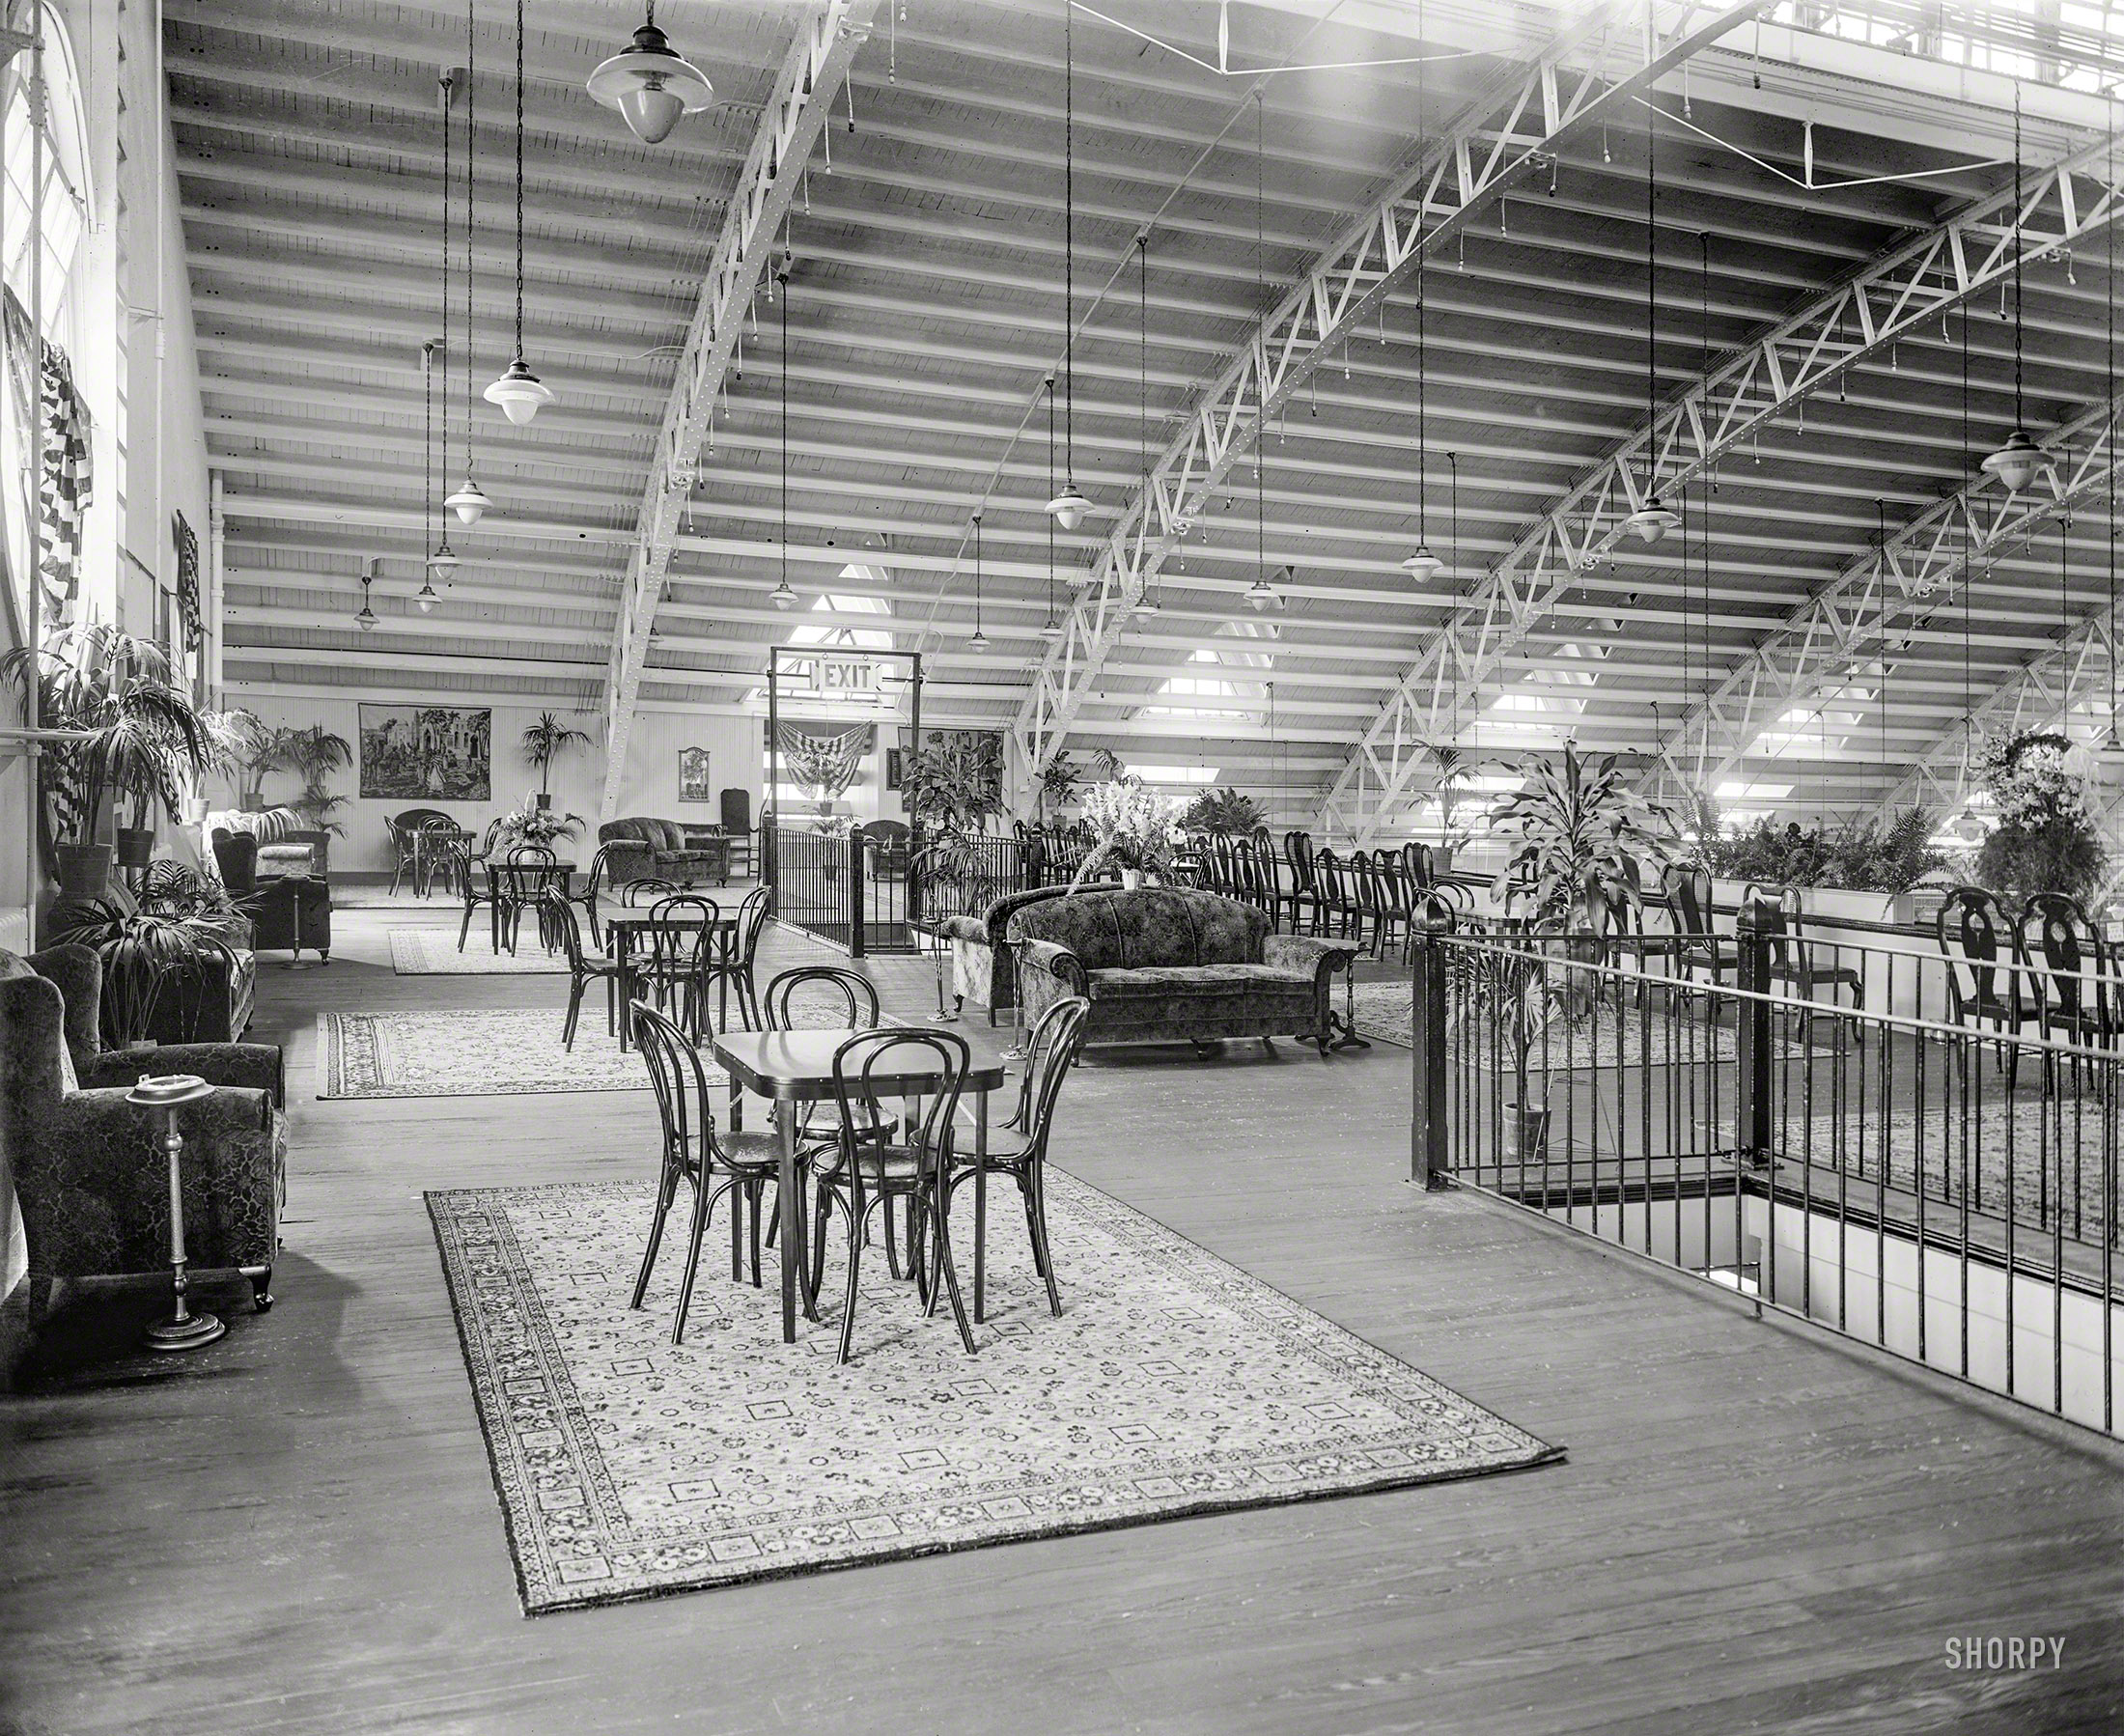 1925. "Convention Hall bowling alleys, lobby." Mezzanine of a long-vanished Washington D.C. landmark, the old Liberty Market at Fifth and K streets. National Photo Company Collection glass negative. View full size.